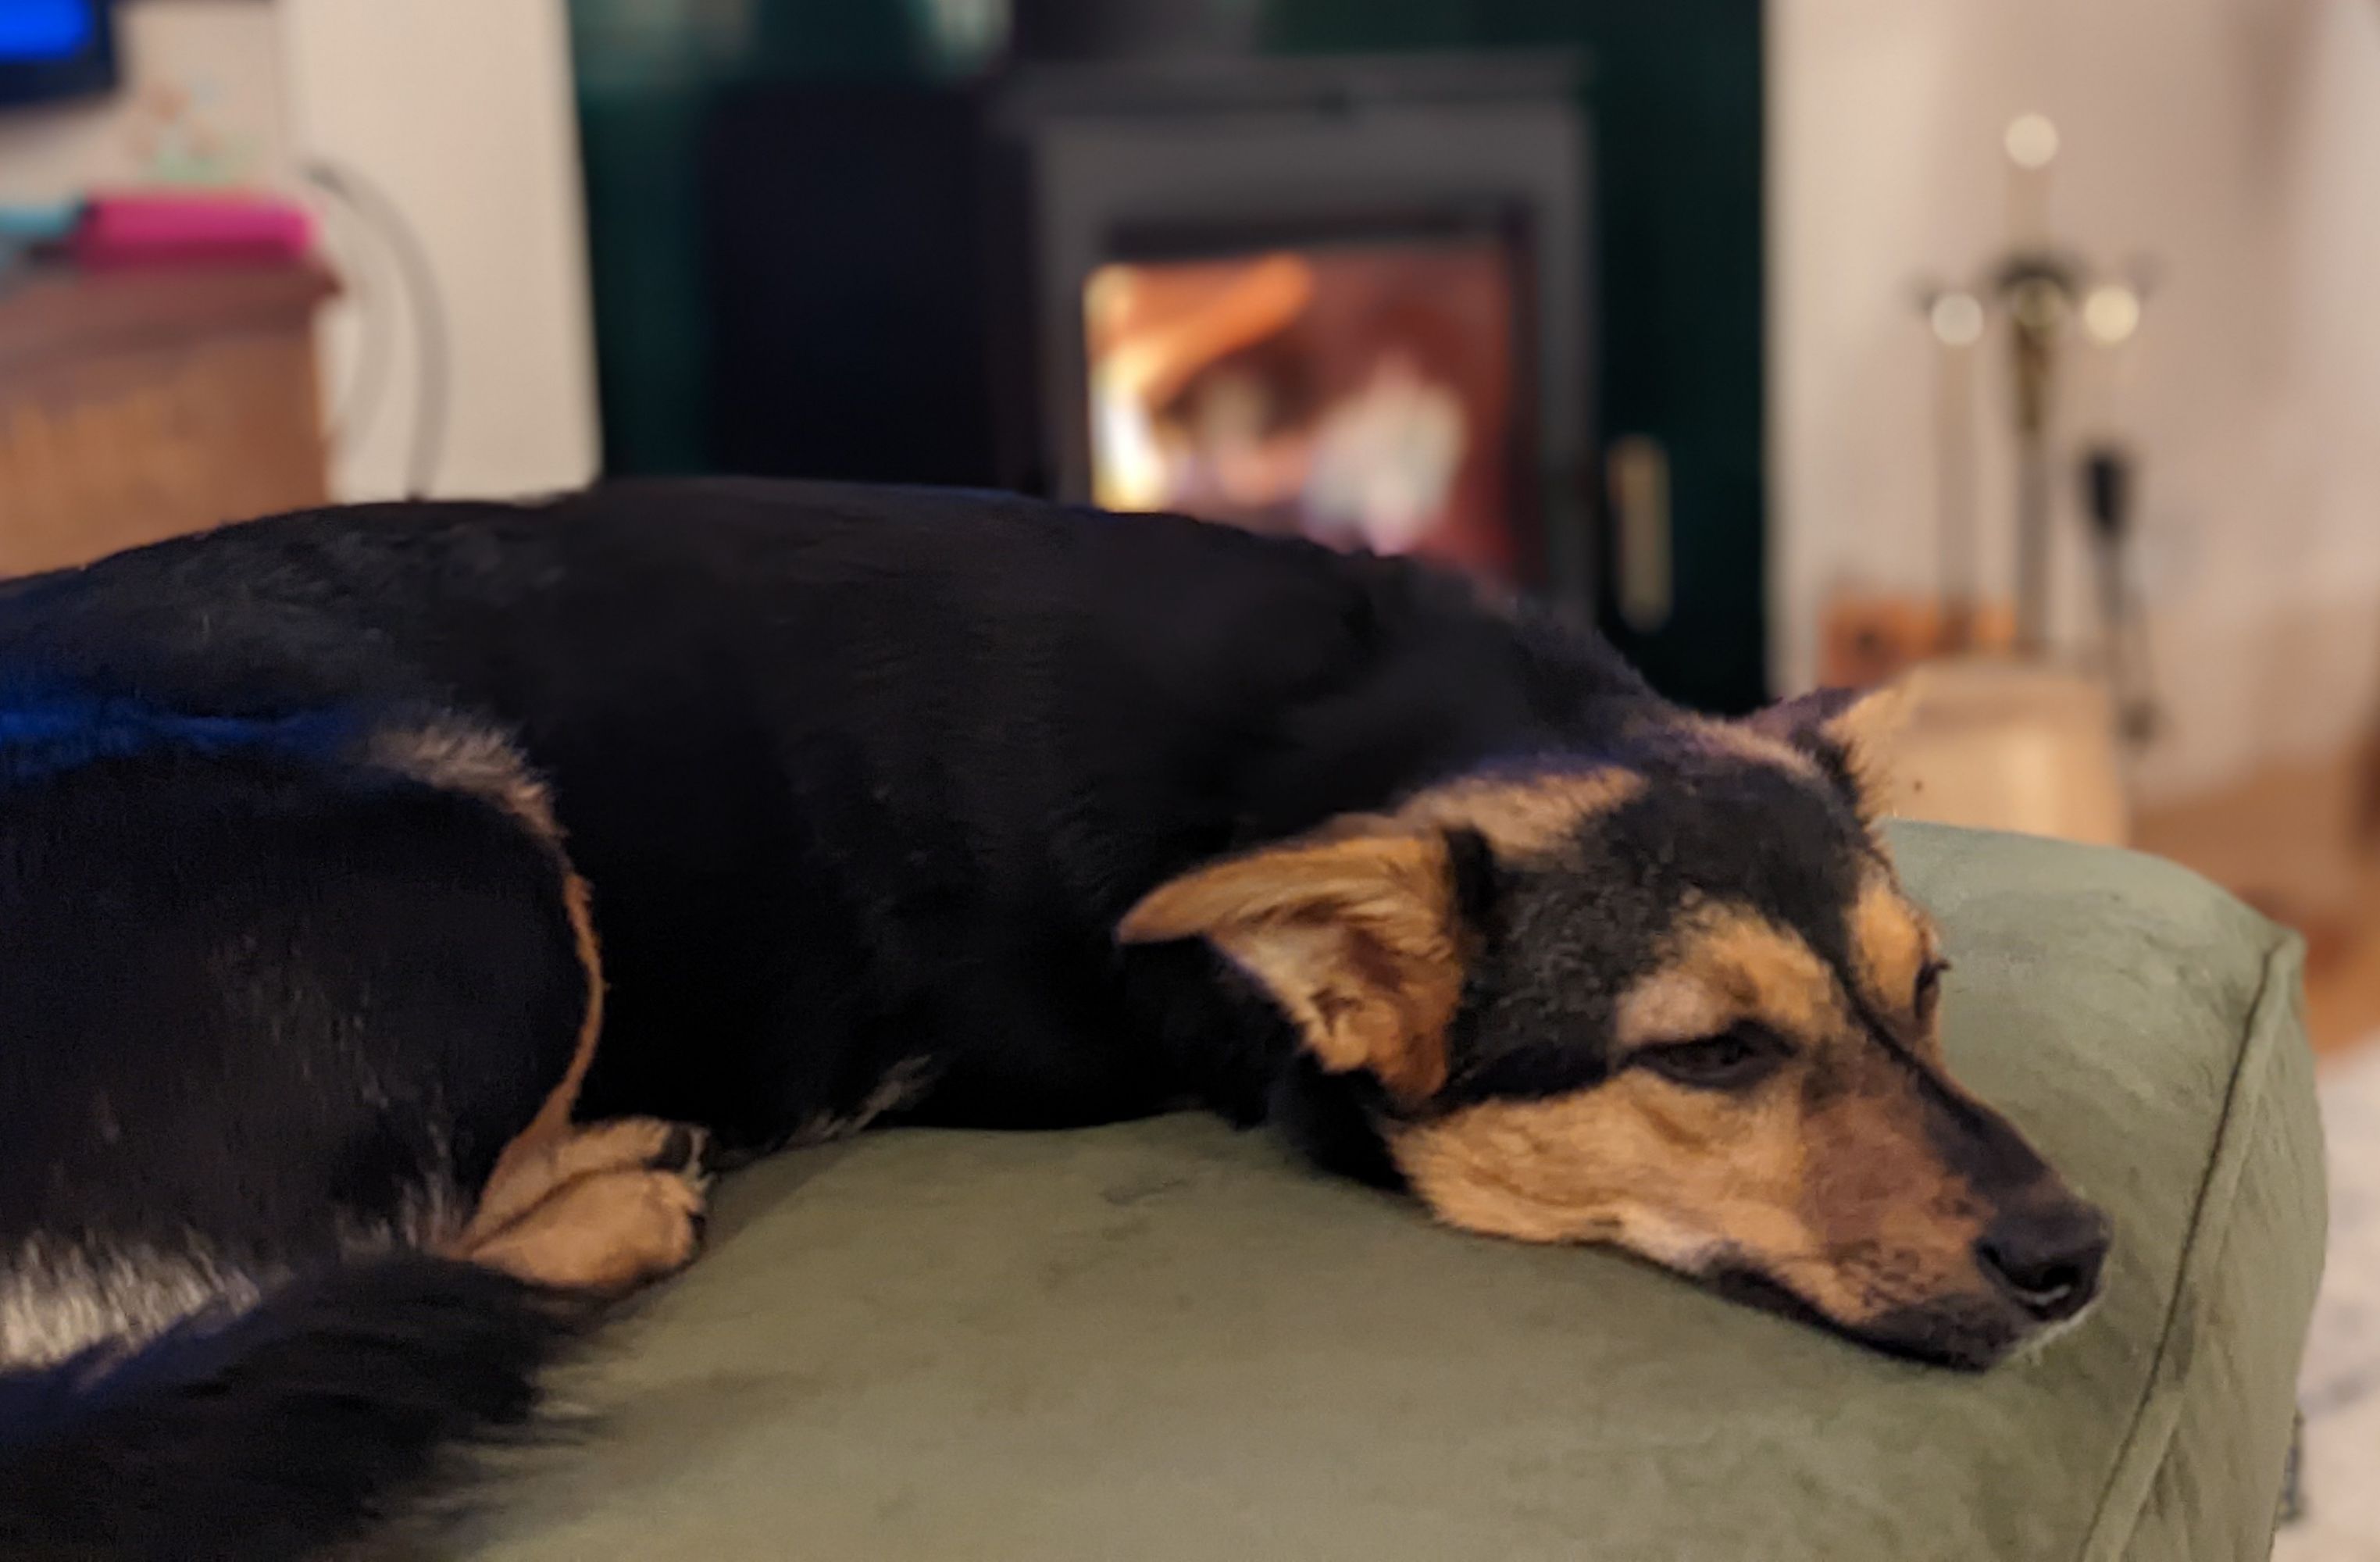 Cookie the puppy fast asleep, slightly curled up, on the velvet green footstool. Behind her, slightly blurred as the focus is on Cookie, is the log burner blazing away